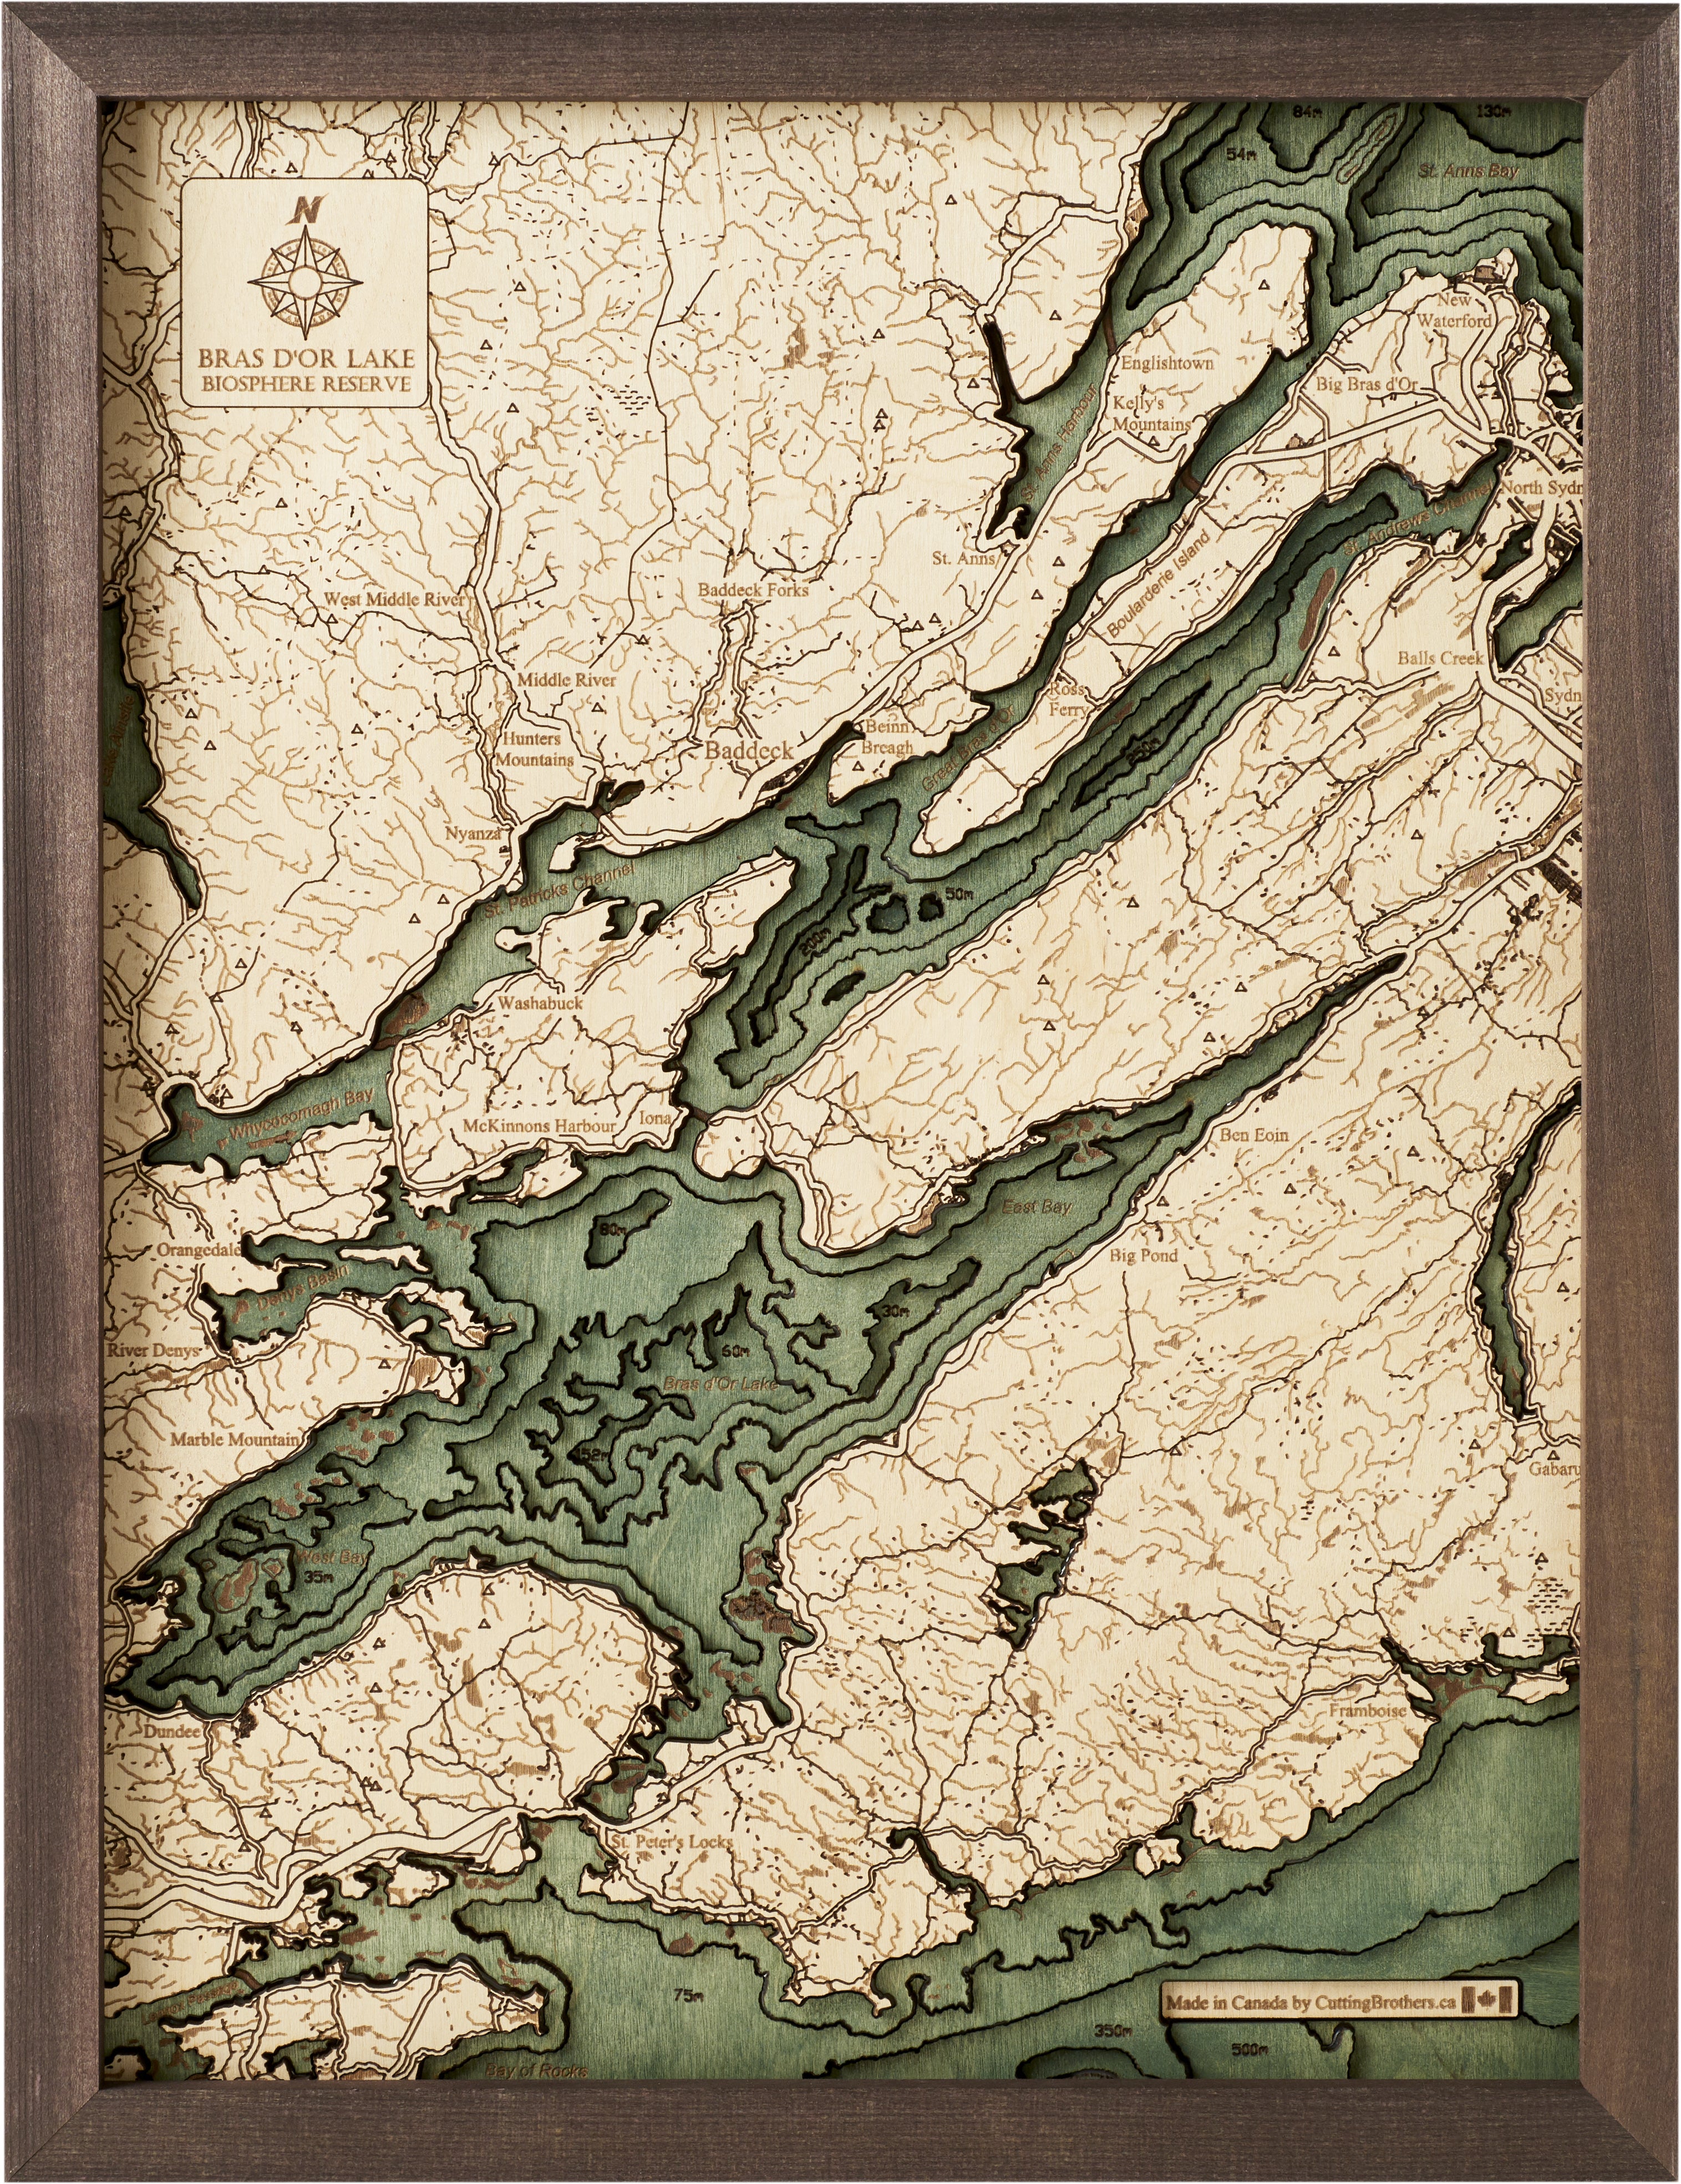 BRAS D'or LAKE 3D WOODEN WALL MAP - Version S